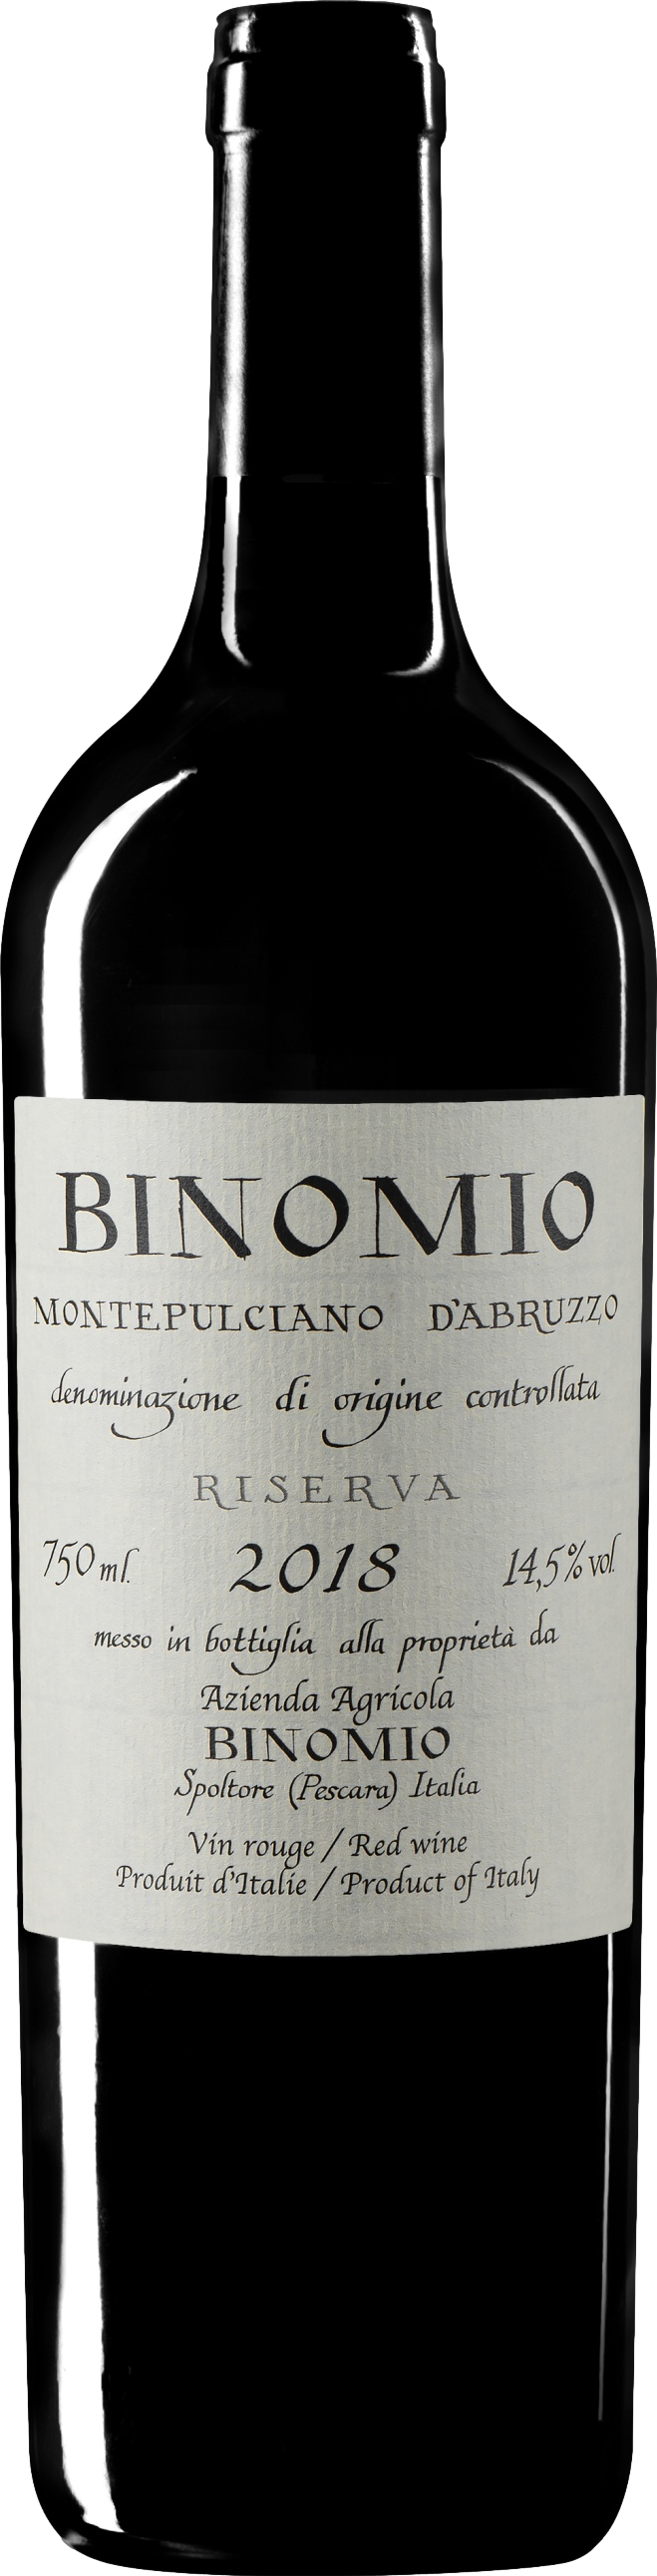 Was Now günstig Kaufen-Binomio Montepulciano d'Abruzzo Riserva 2018. Binomio Montepulciano d'Abruzzo Riserva 2018 <![CDATA[Drink it now or cellar for up to 15 years. It is recommended to decant it half an hour before serving.   La Valentina winery was established in 1990, and s